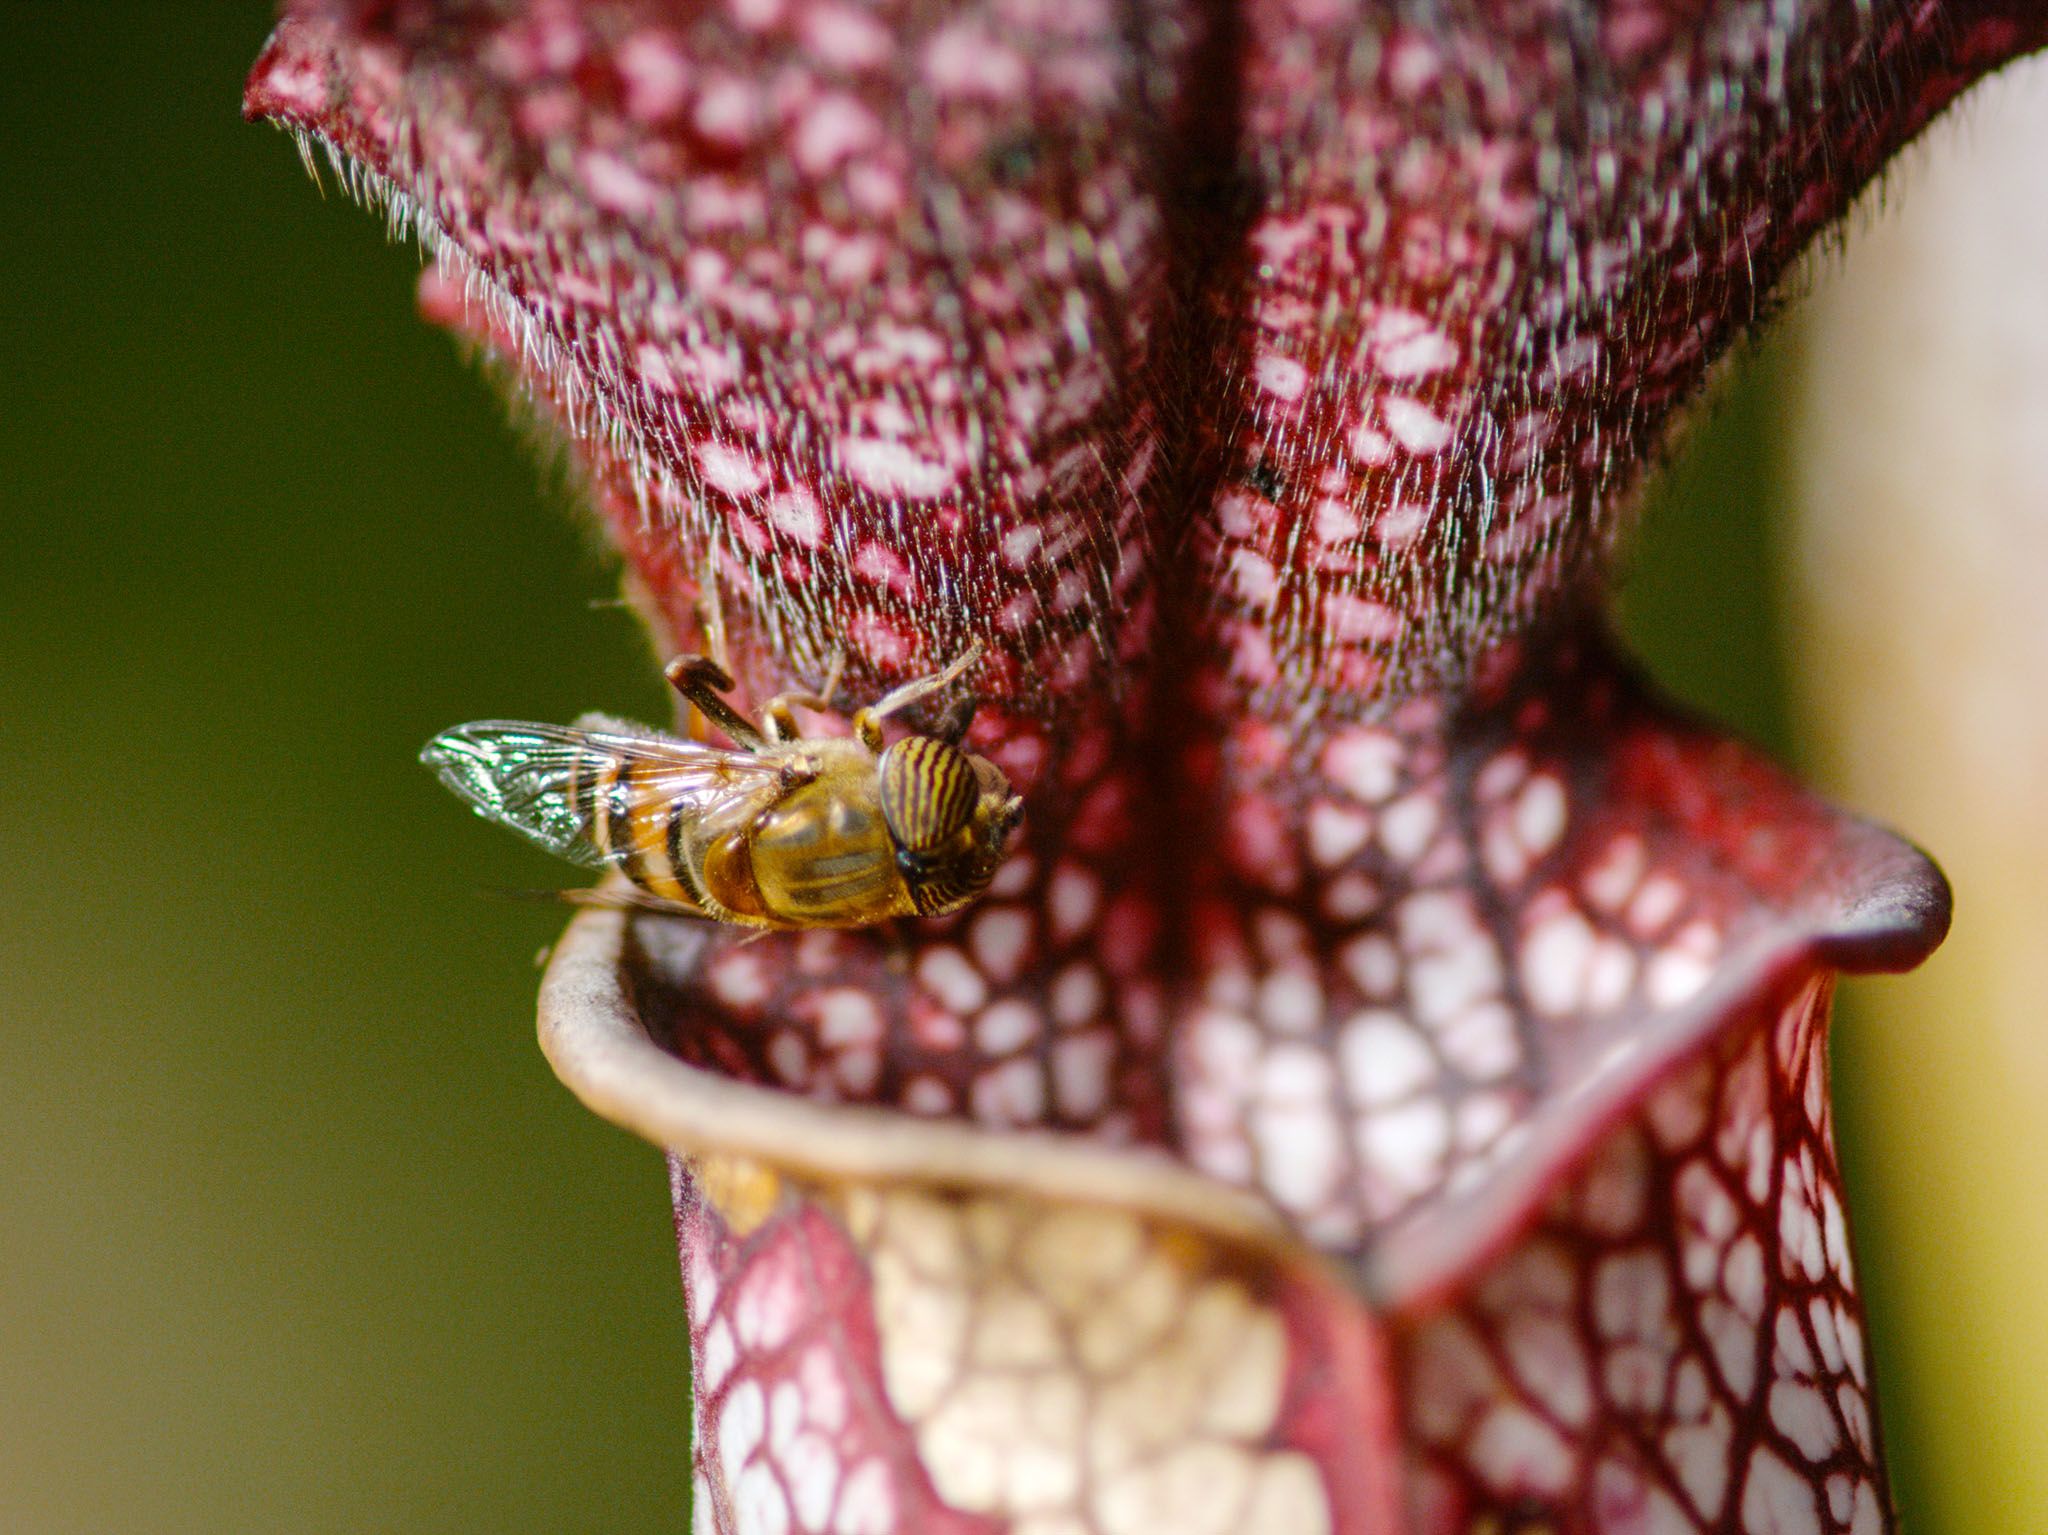 South Africa: Bee sitting on the lip of a pitcher plant. The pitcher's vibrant colours and... [Photo of the day - July 2017]